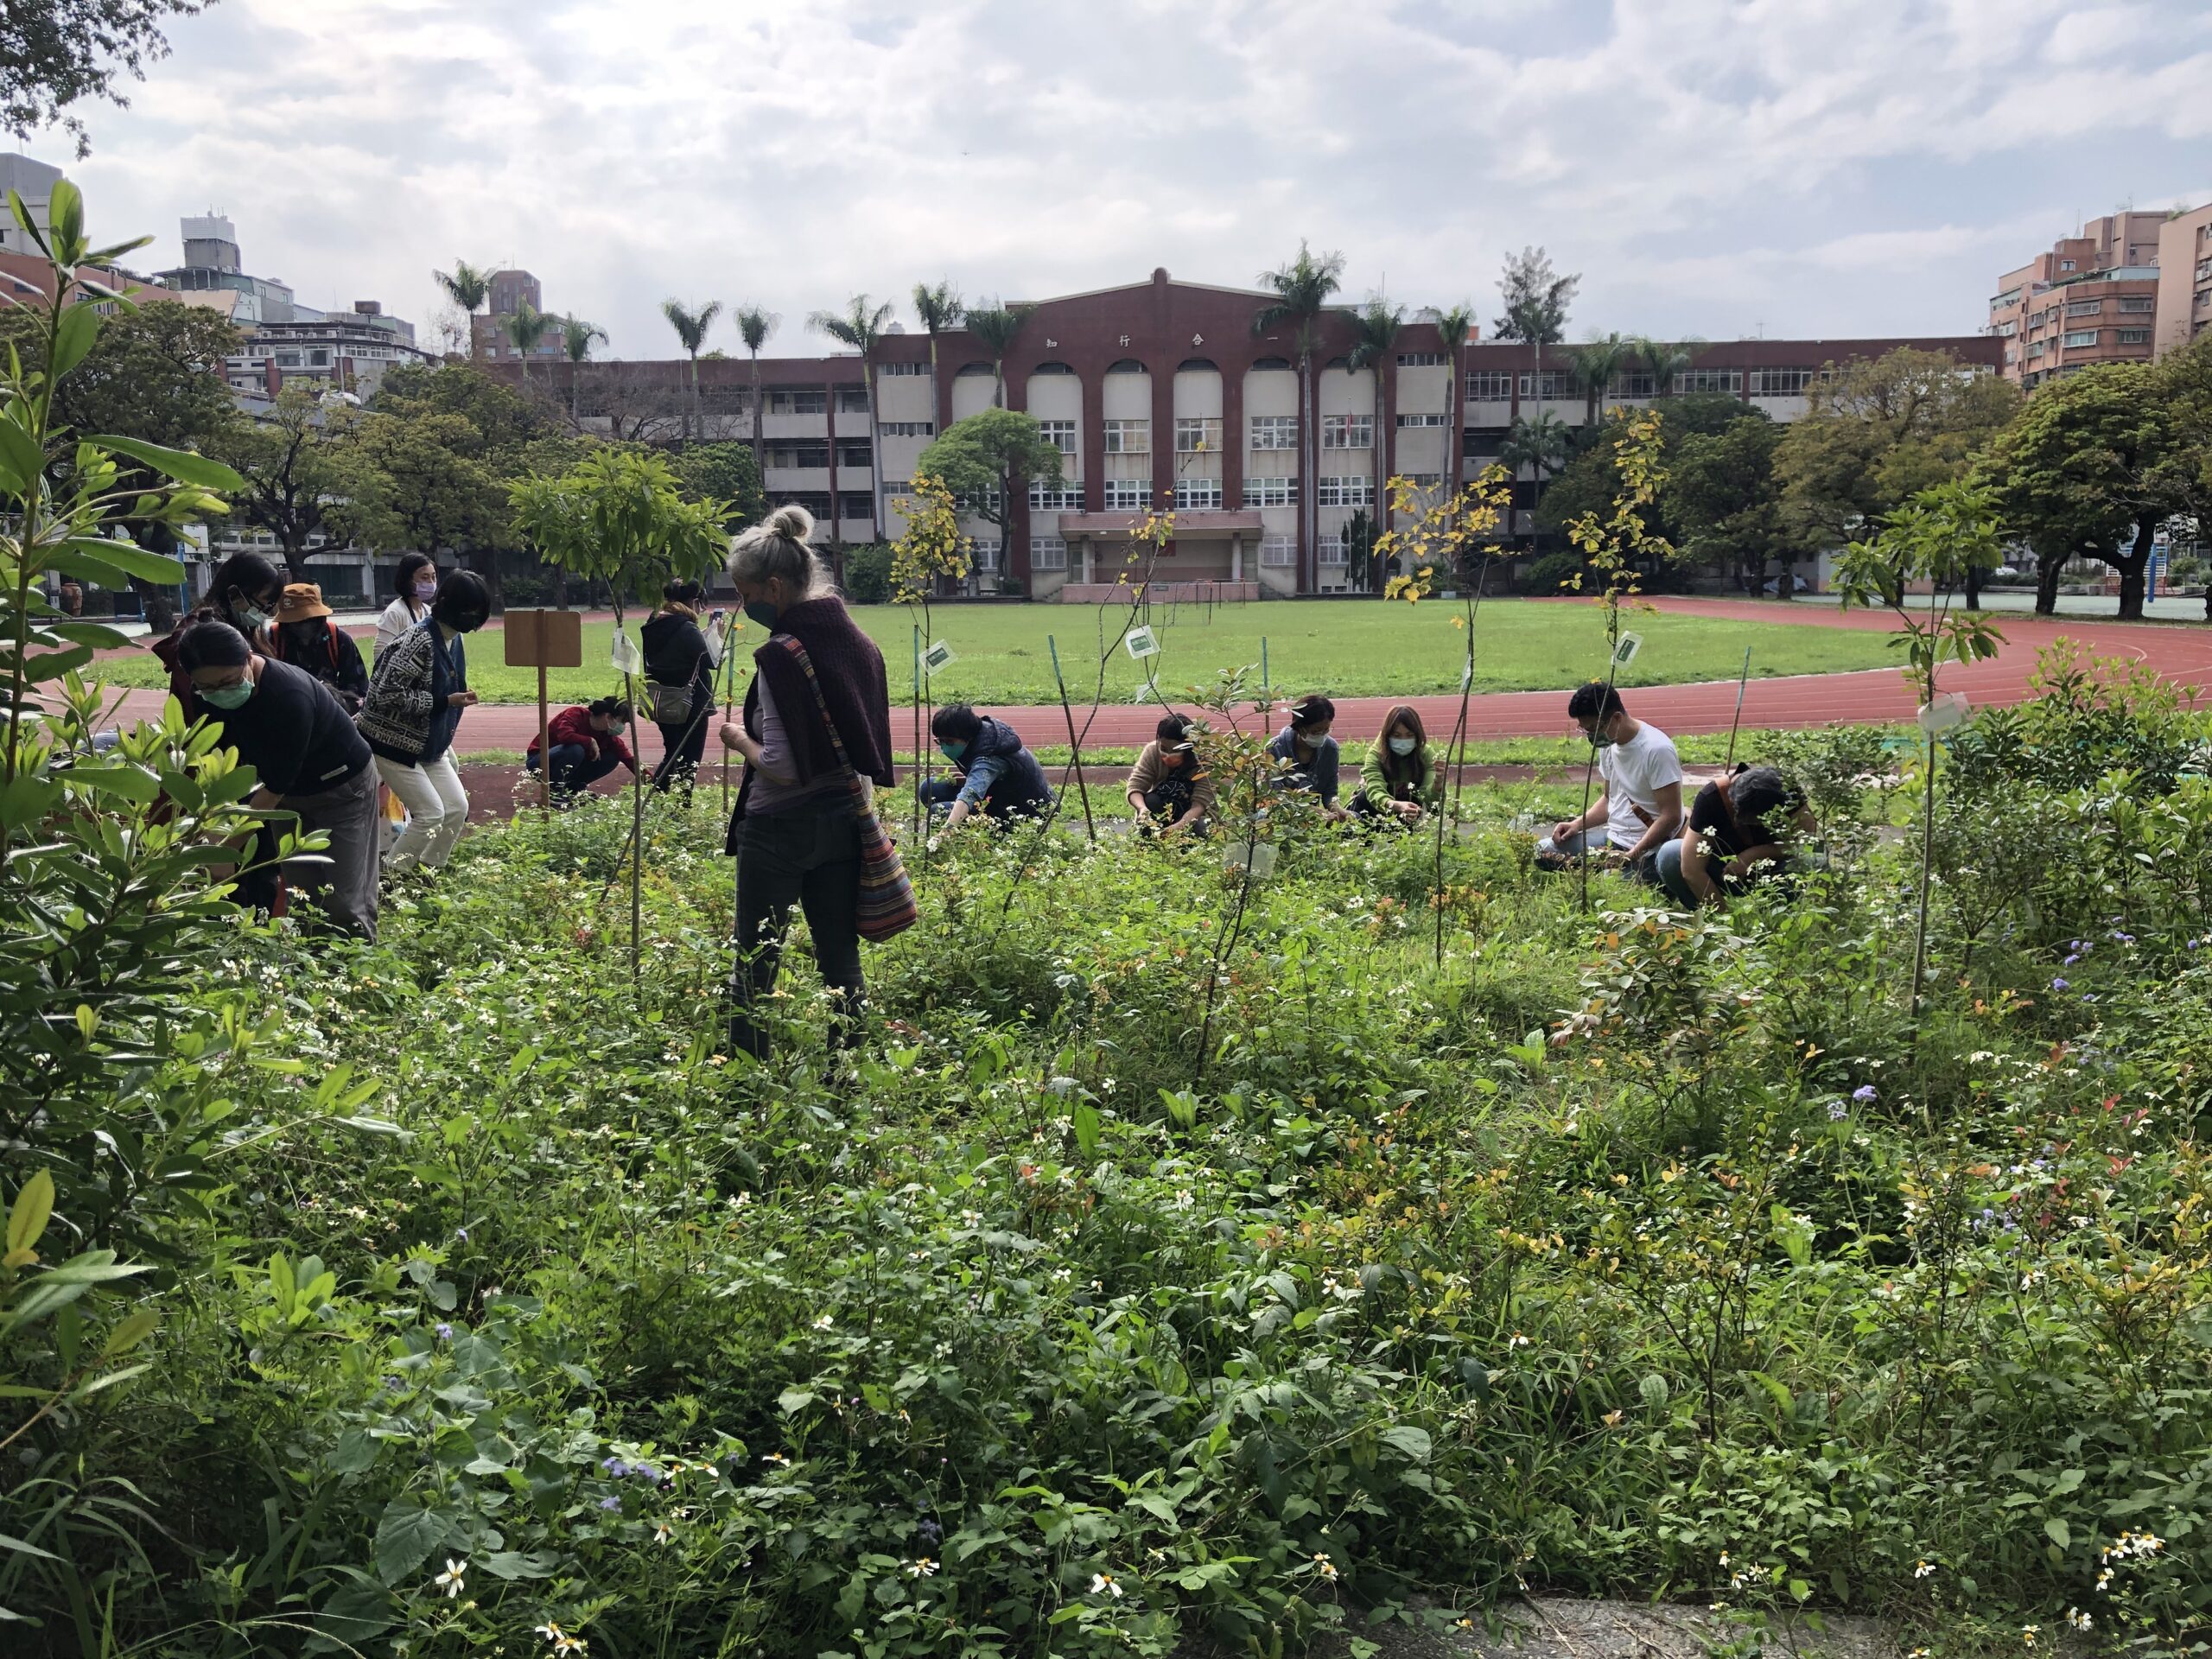 A thriving, abundant field bursting with unkempt greenery in a lot by a school. Children and adults alike are squatting in the field picking plants.